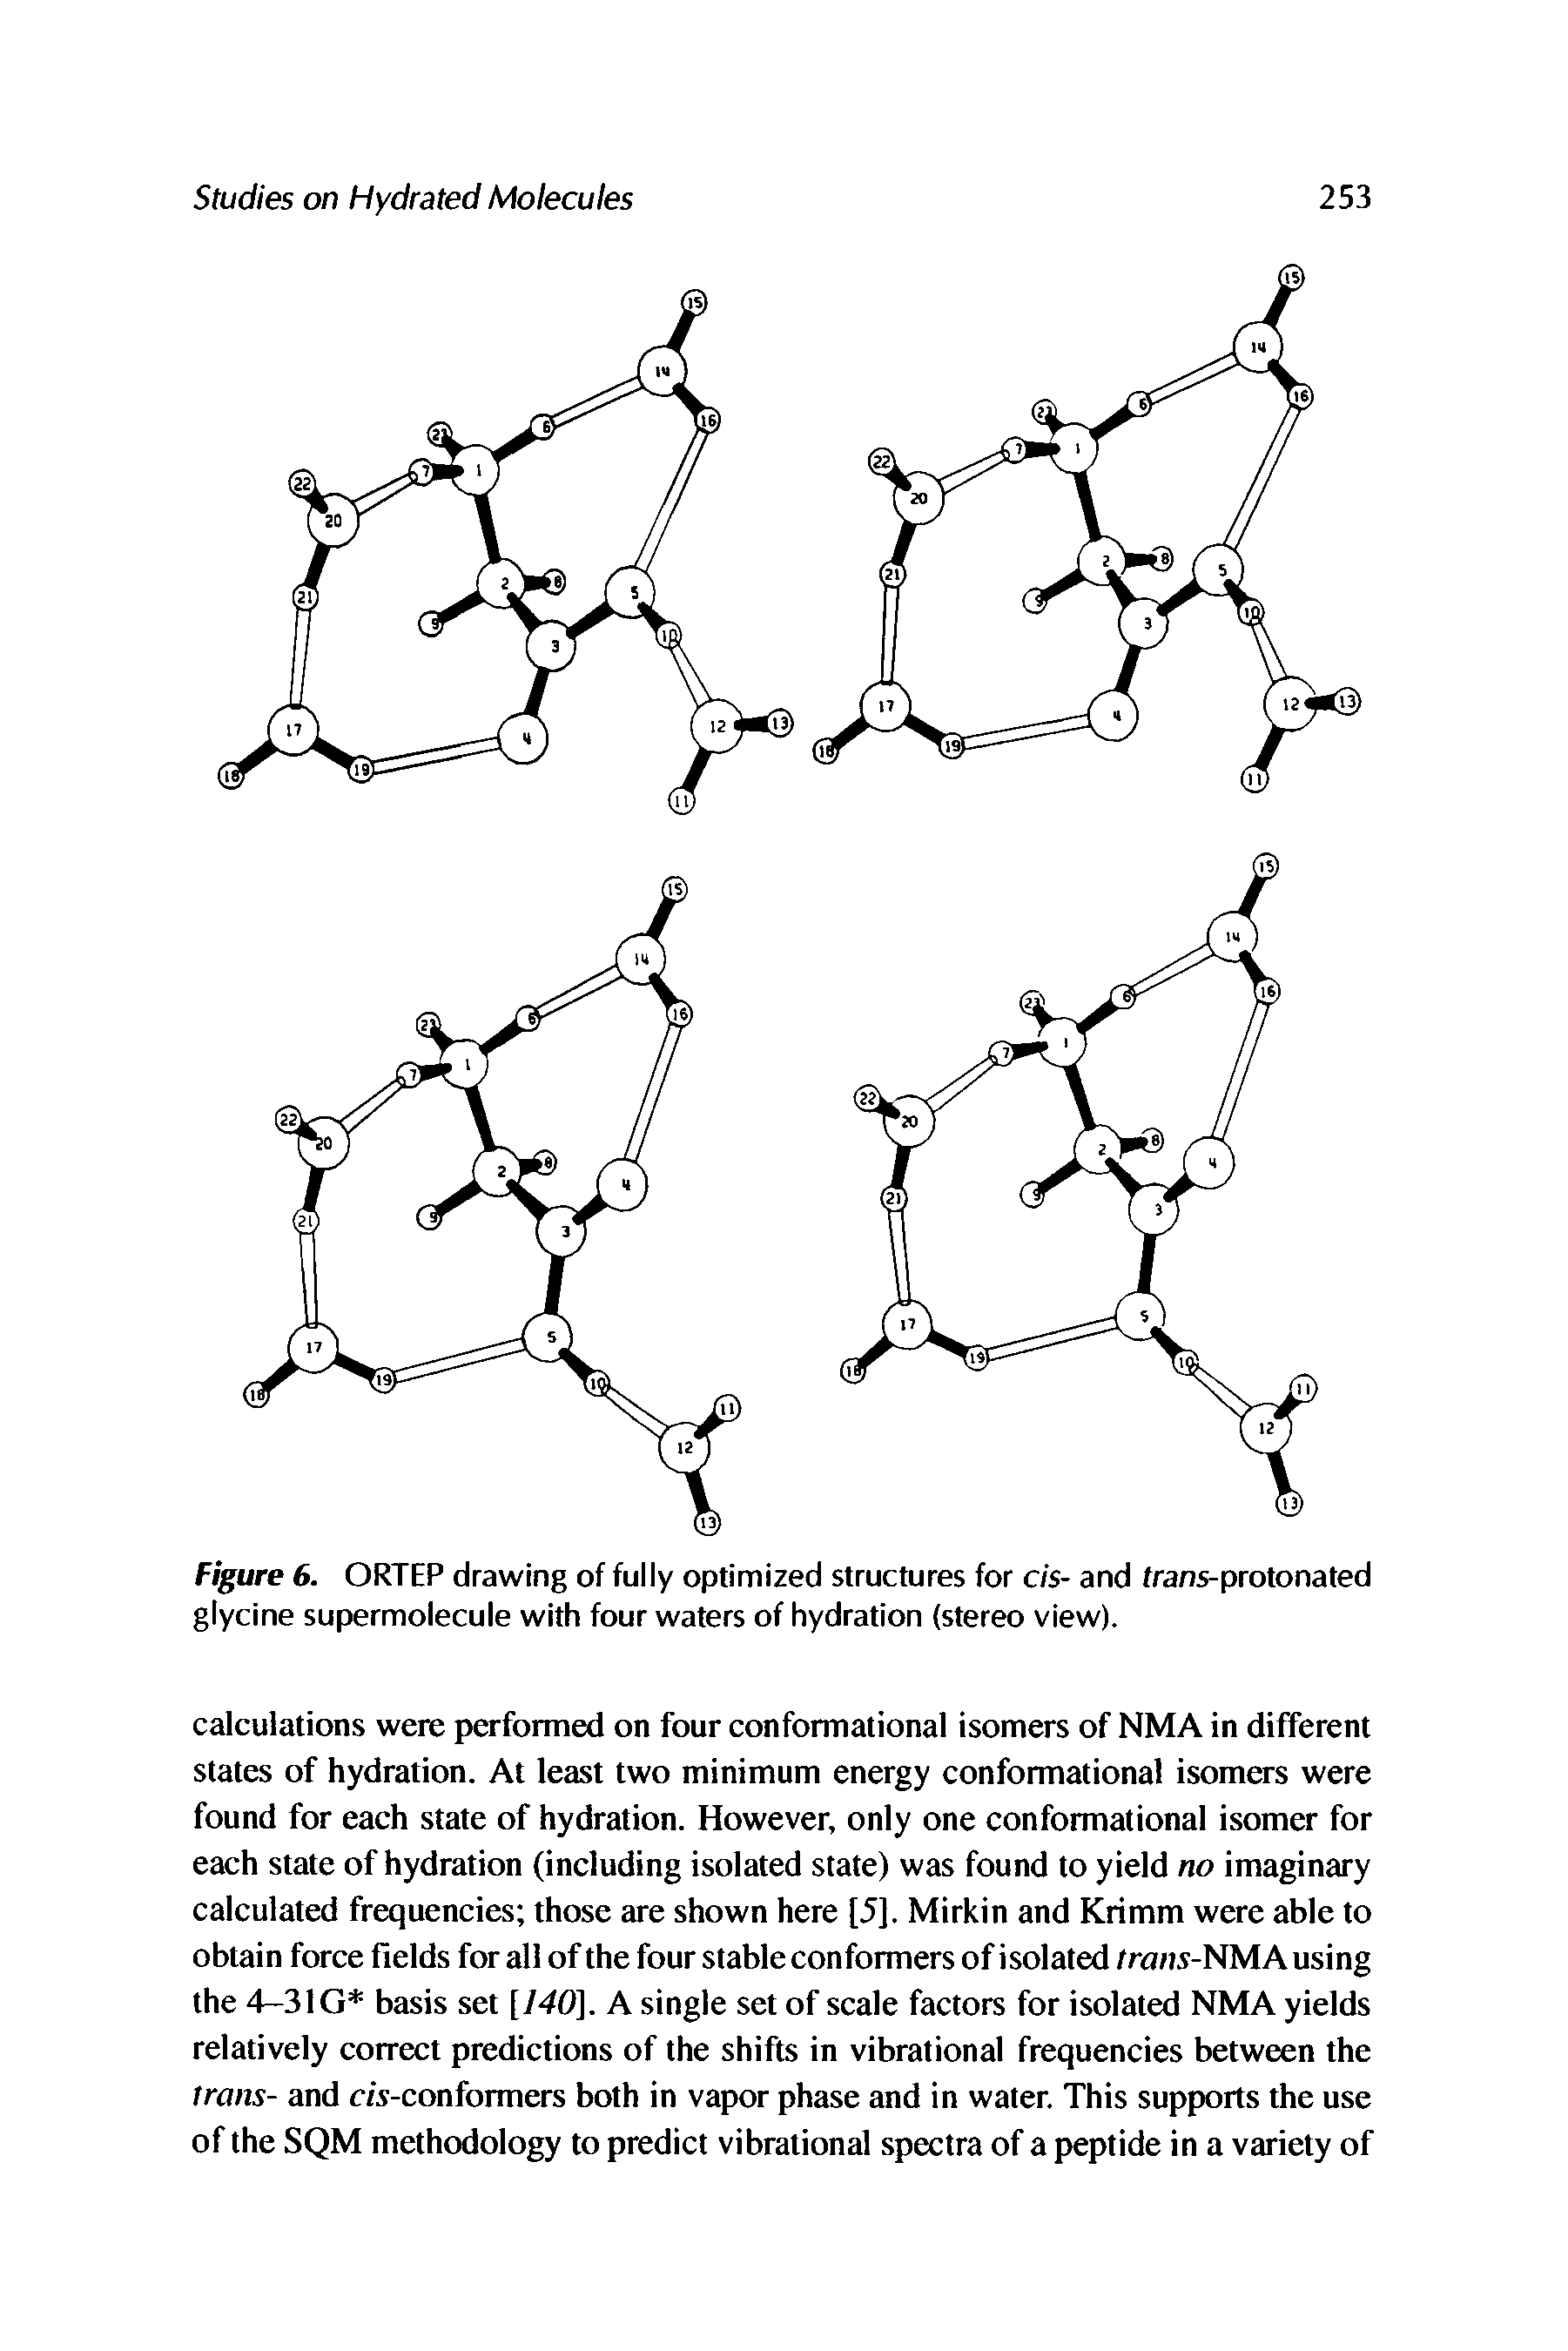 Figure 6. ORTEP drawing of fully optimized structures for c/ s- and frans-protonated glycine supermolecule with four waters of hydration (stereo view).